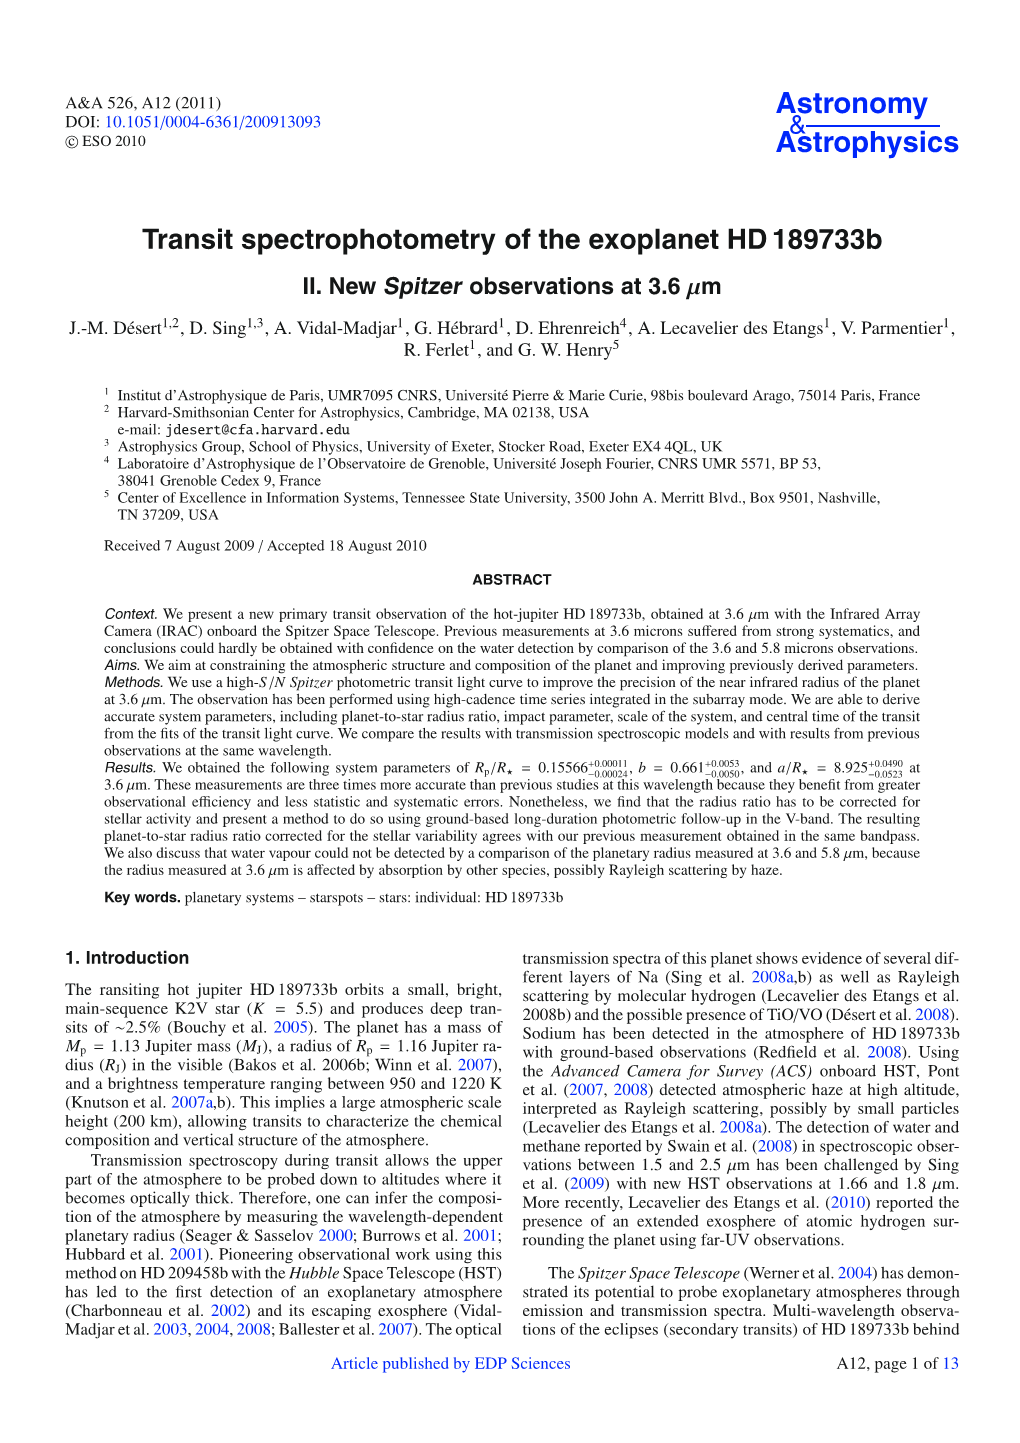 Transit Spectrophotometry of the Exoplanet HD 189733B II